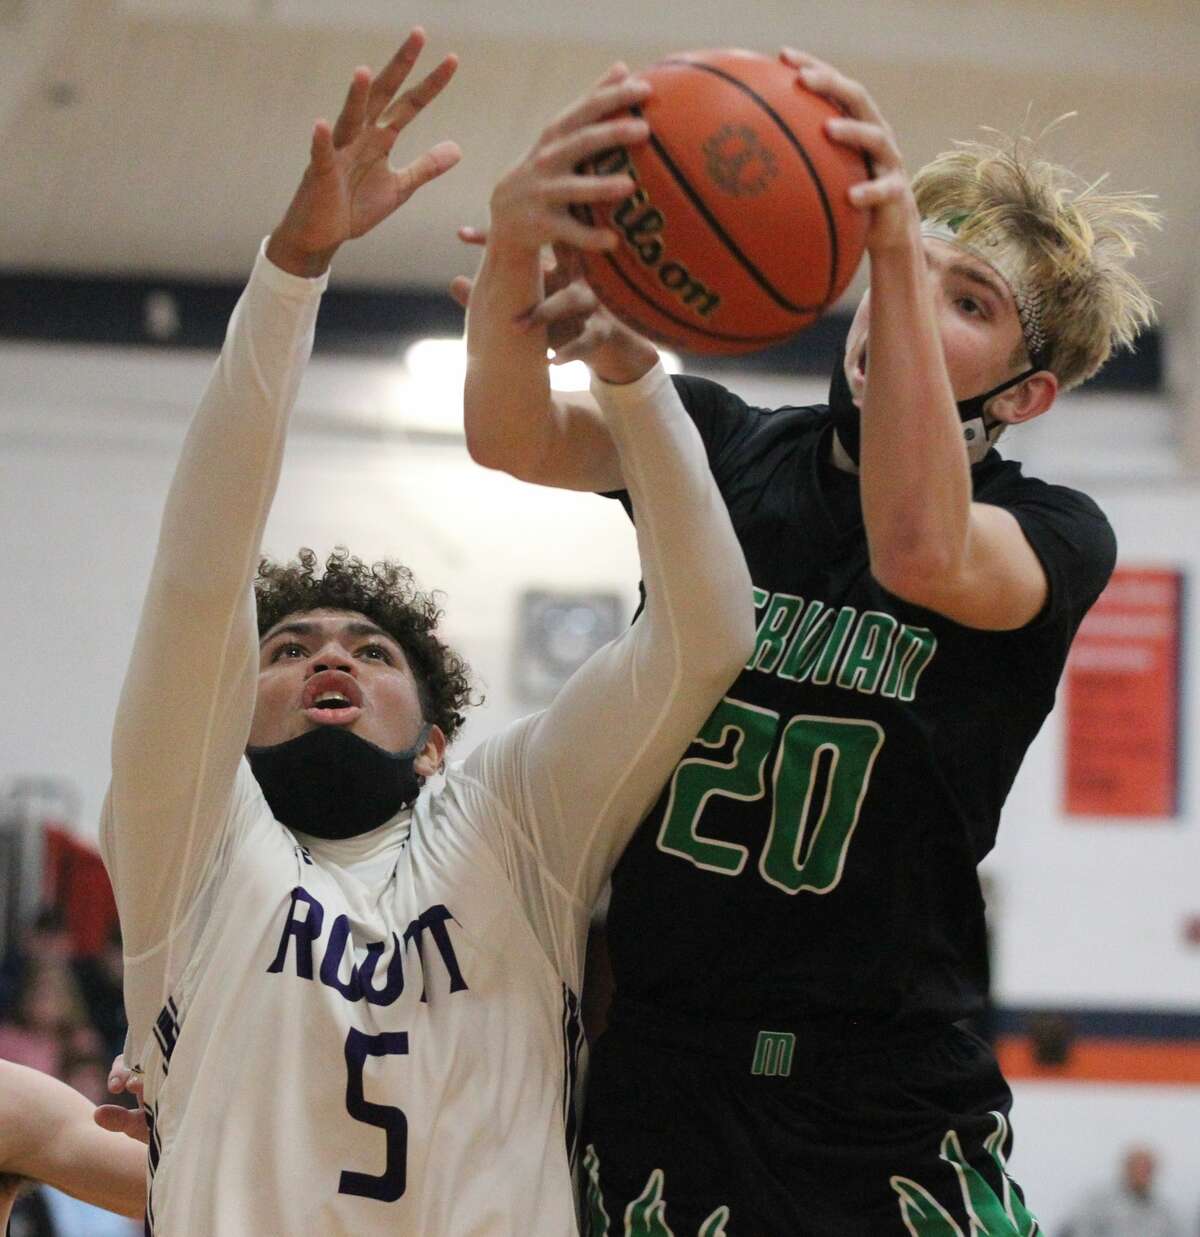 Action from the Routt boys' basketball team's game against Macon Meridian for the championship of the Gene Bergschneider Tournament in New Berlin last Saturday.